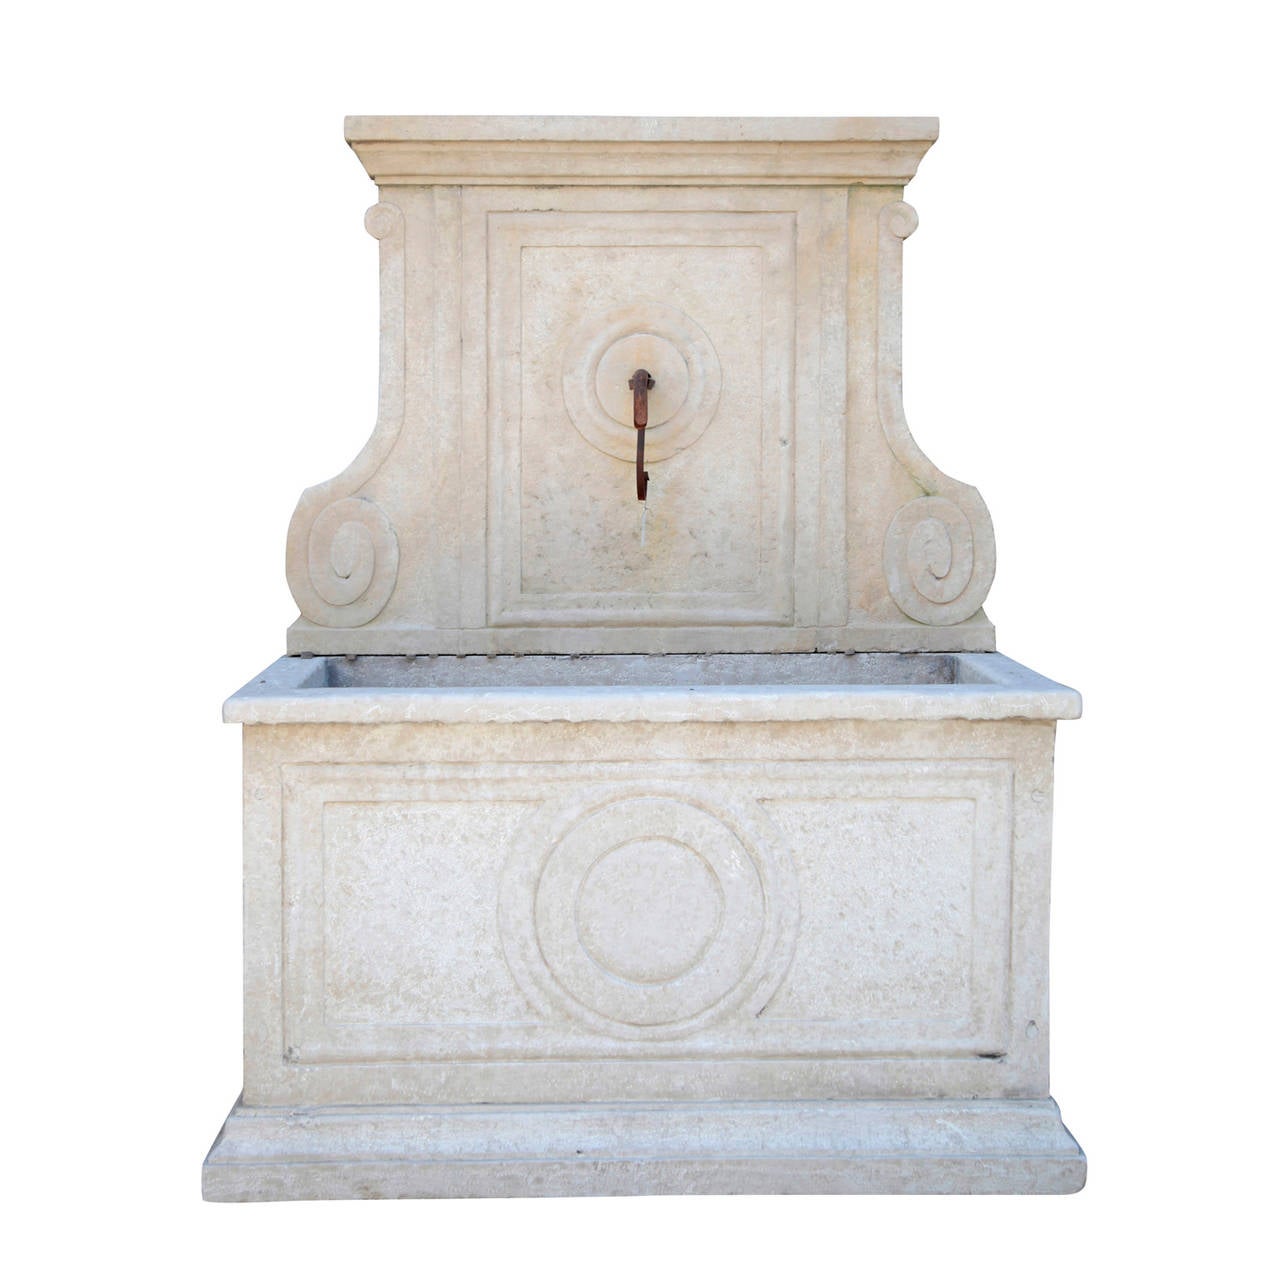 Wall Fountain from the 20th Century out of Marble giallo d'Istria from southern Europe. The transverse rectangular basin stands on a slightly projecting base. The real panel is decorated with architectural elements and clear, classicistic lines.